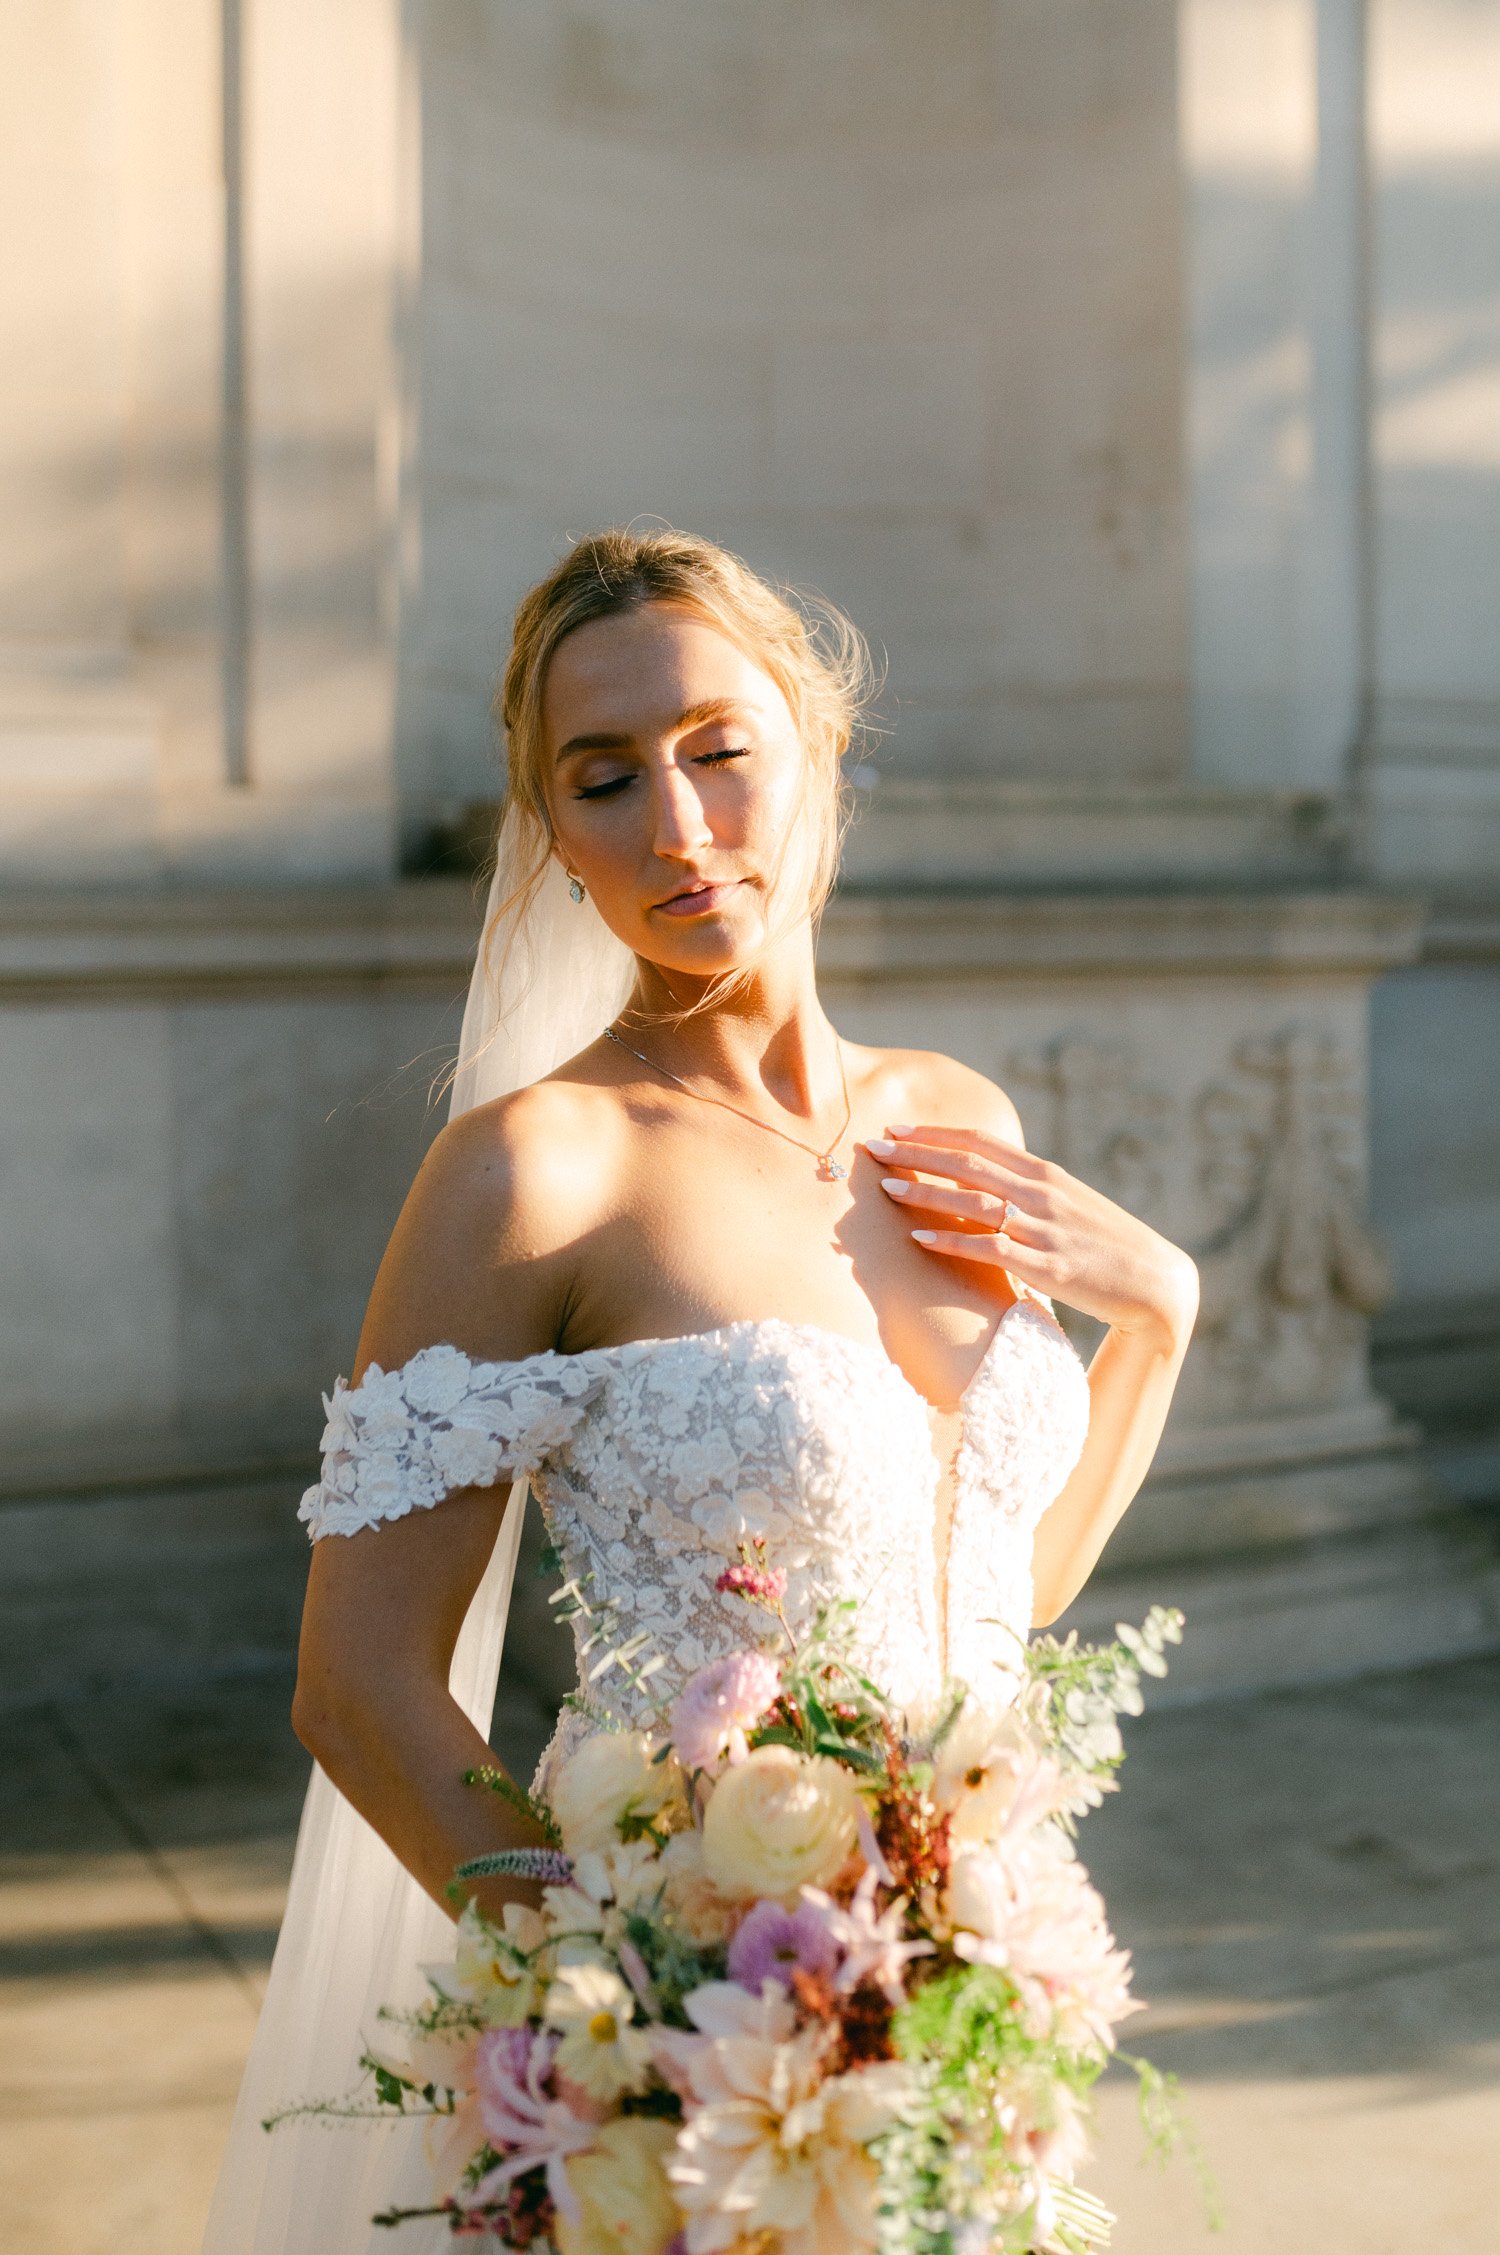 California academy of Sciences in San Francisco Wedding, photo of the bride by the sunlight in her beautiful lace off-shoulder wedding dress and paste colors wedding bouquet